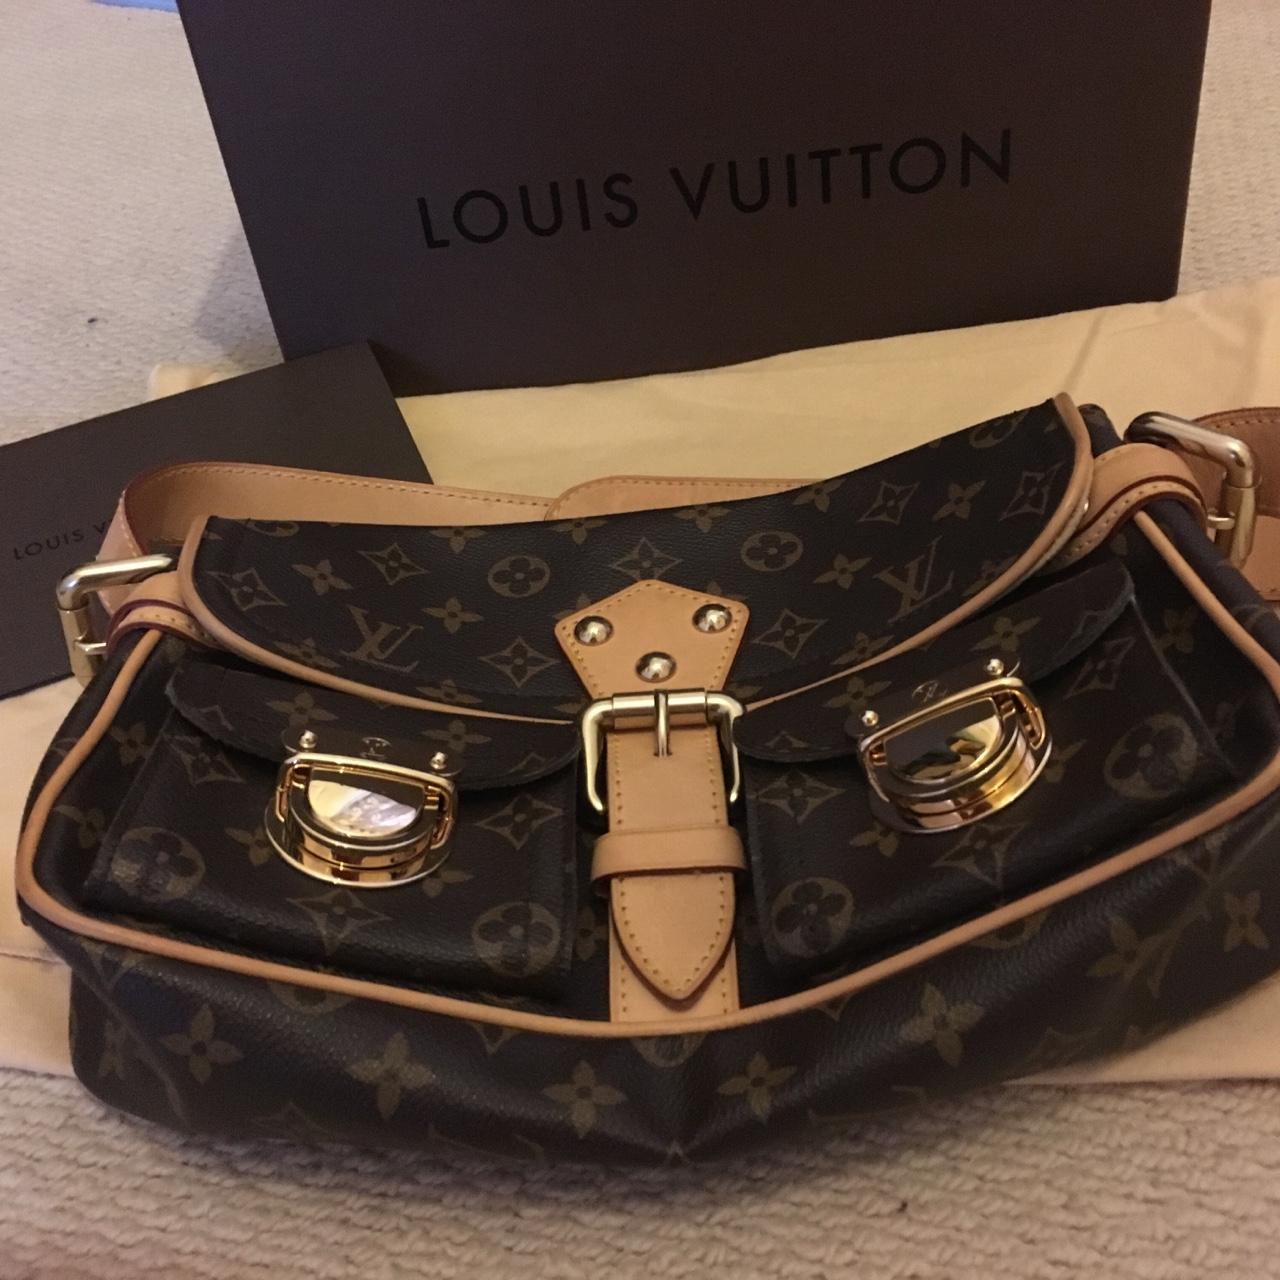 Is this Louis Vuitton bag real? : r/Depop